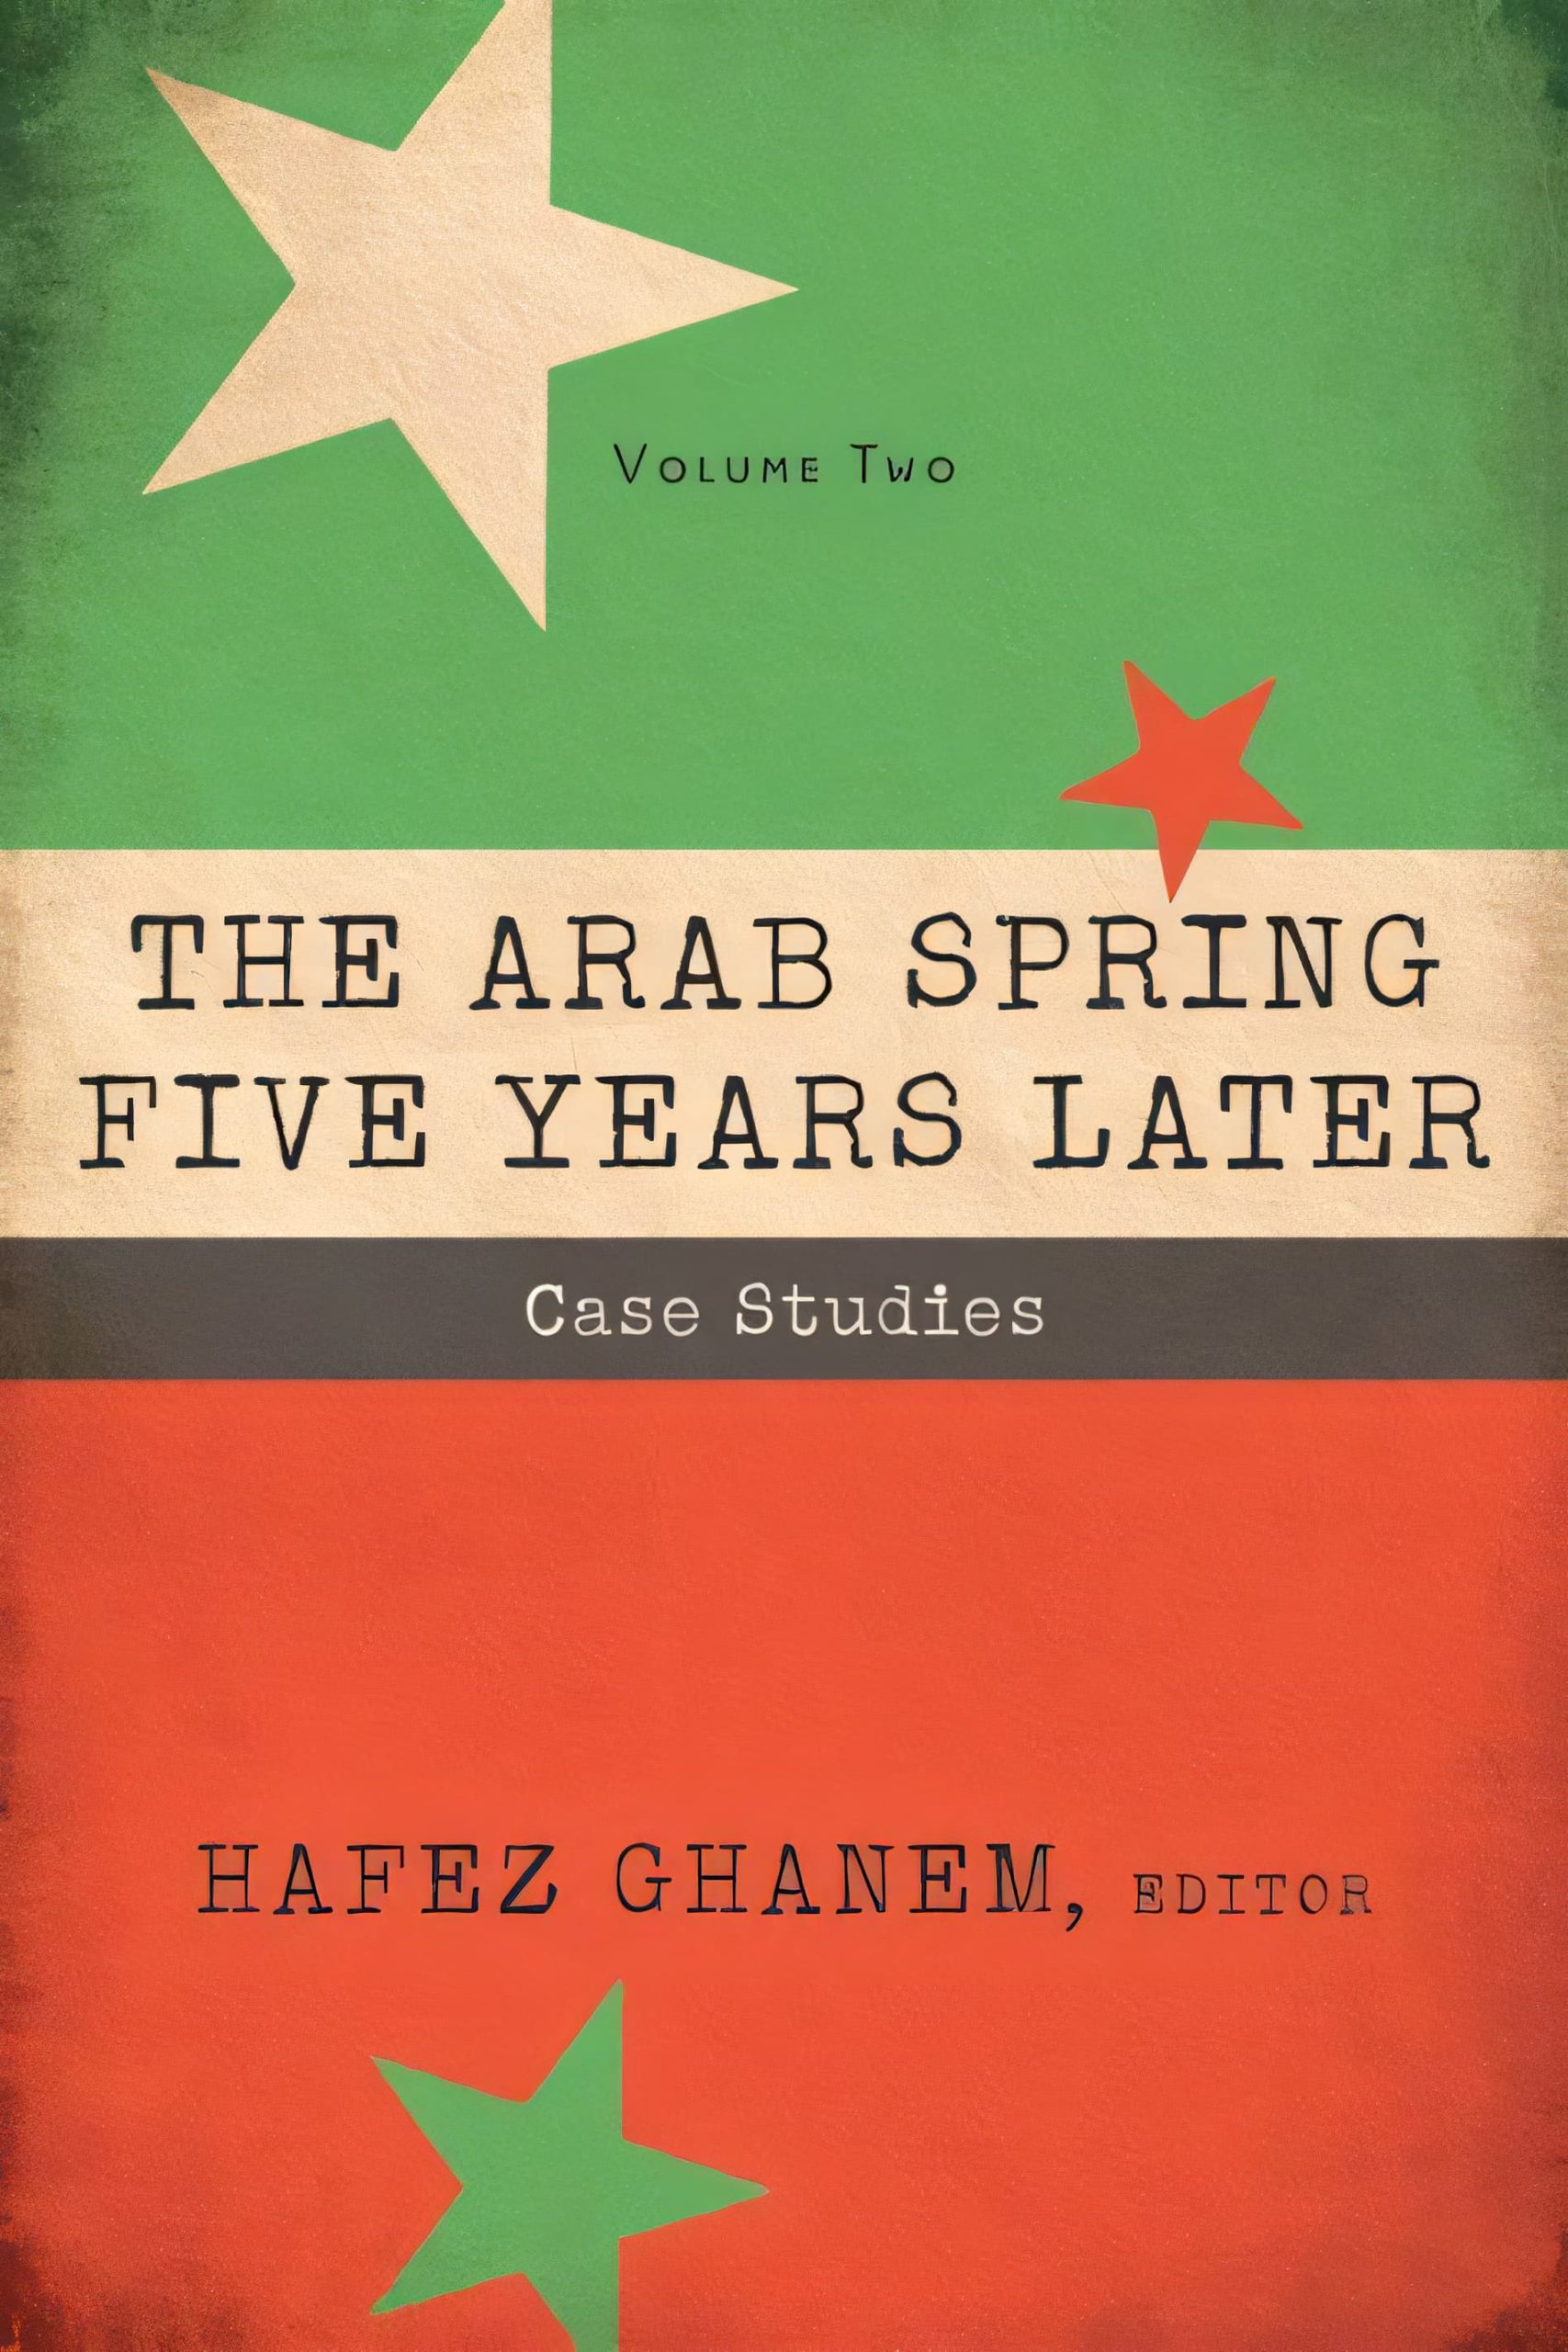 The Arab Spring Five Years Later Toward Greater Inclusiveness (Volume 1)